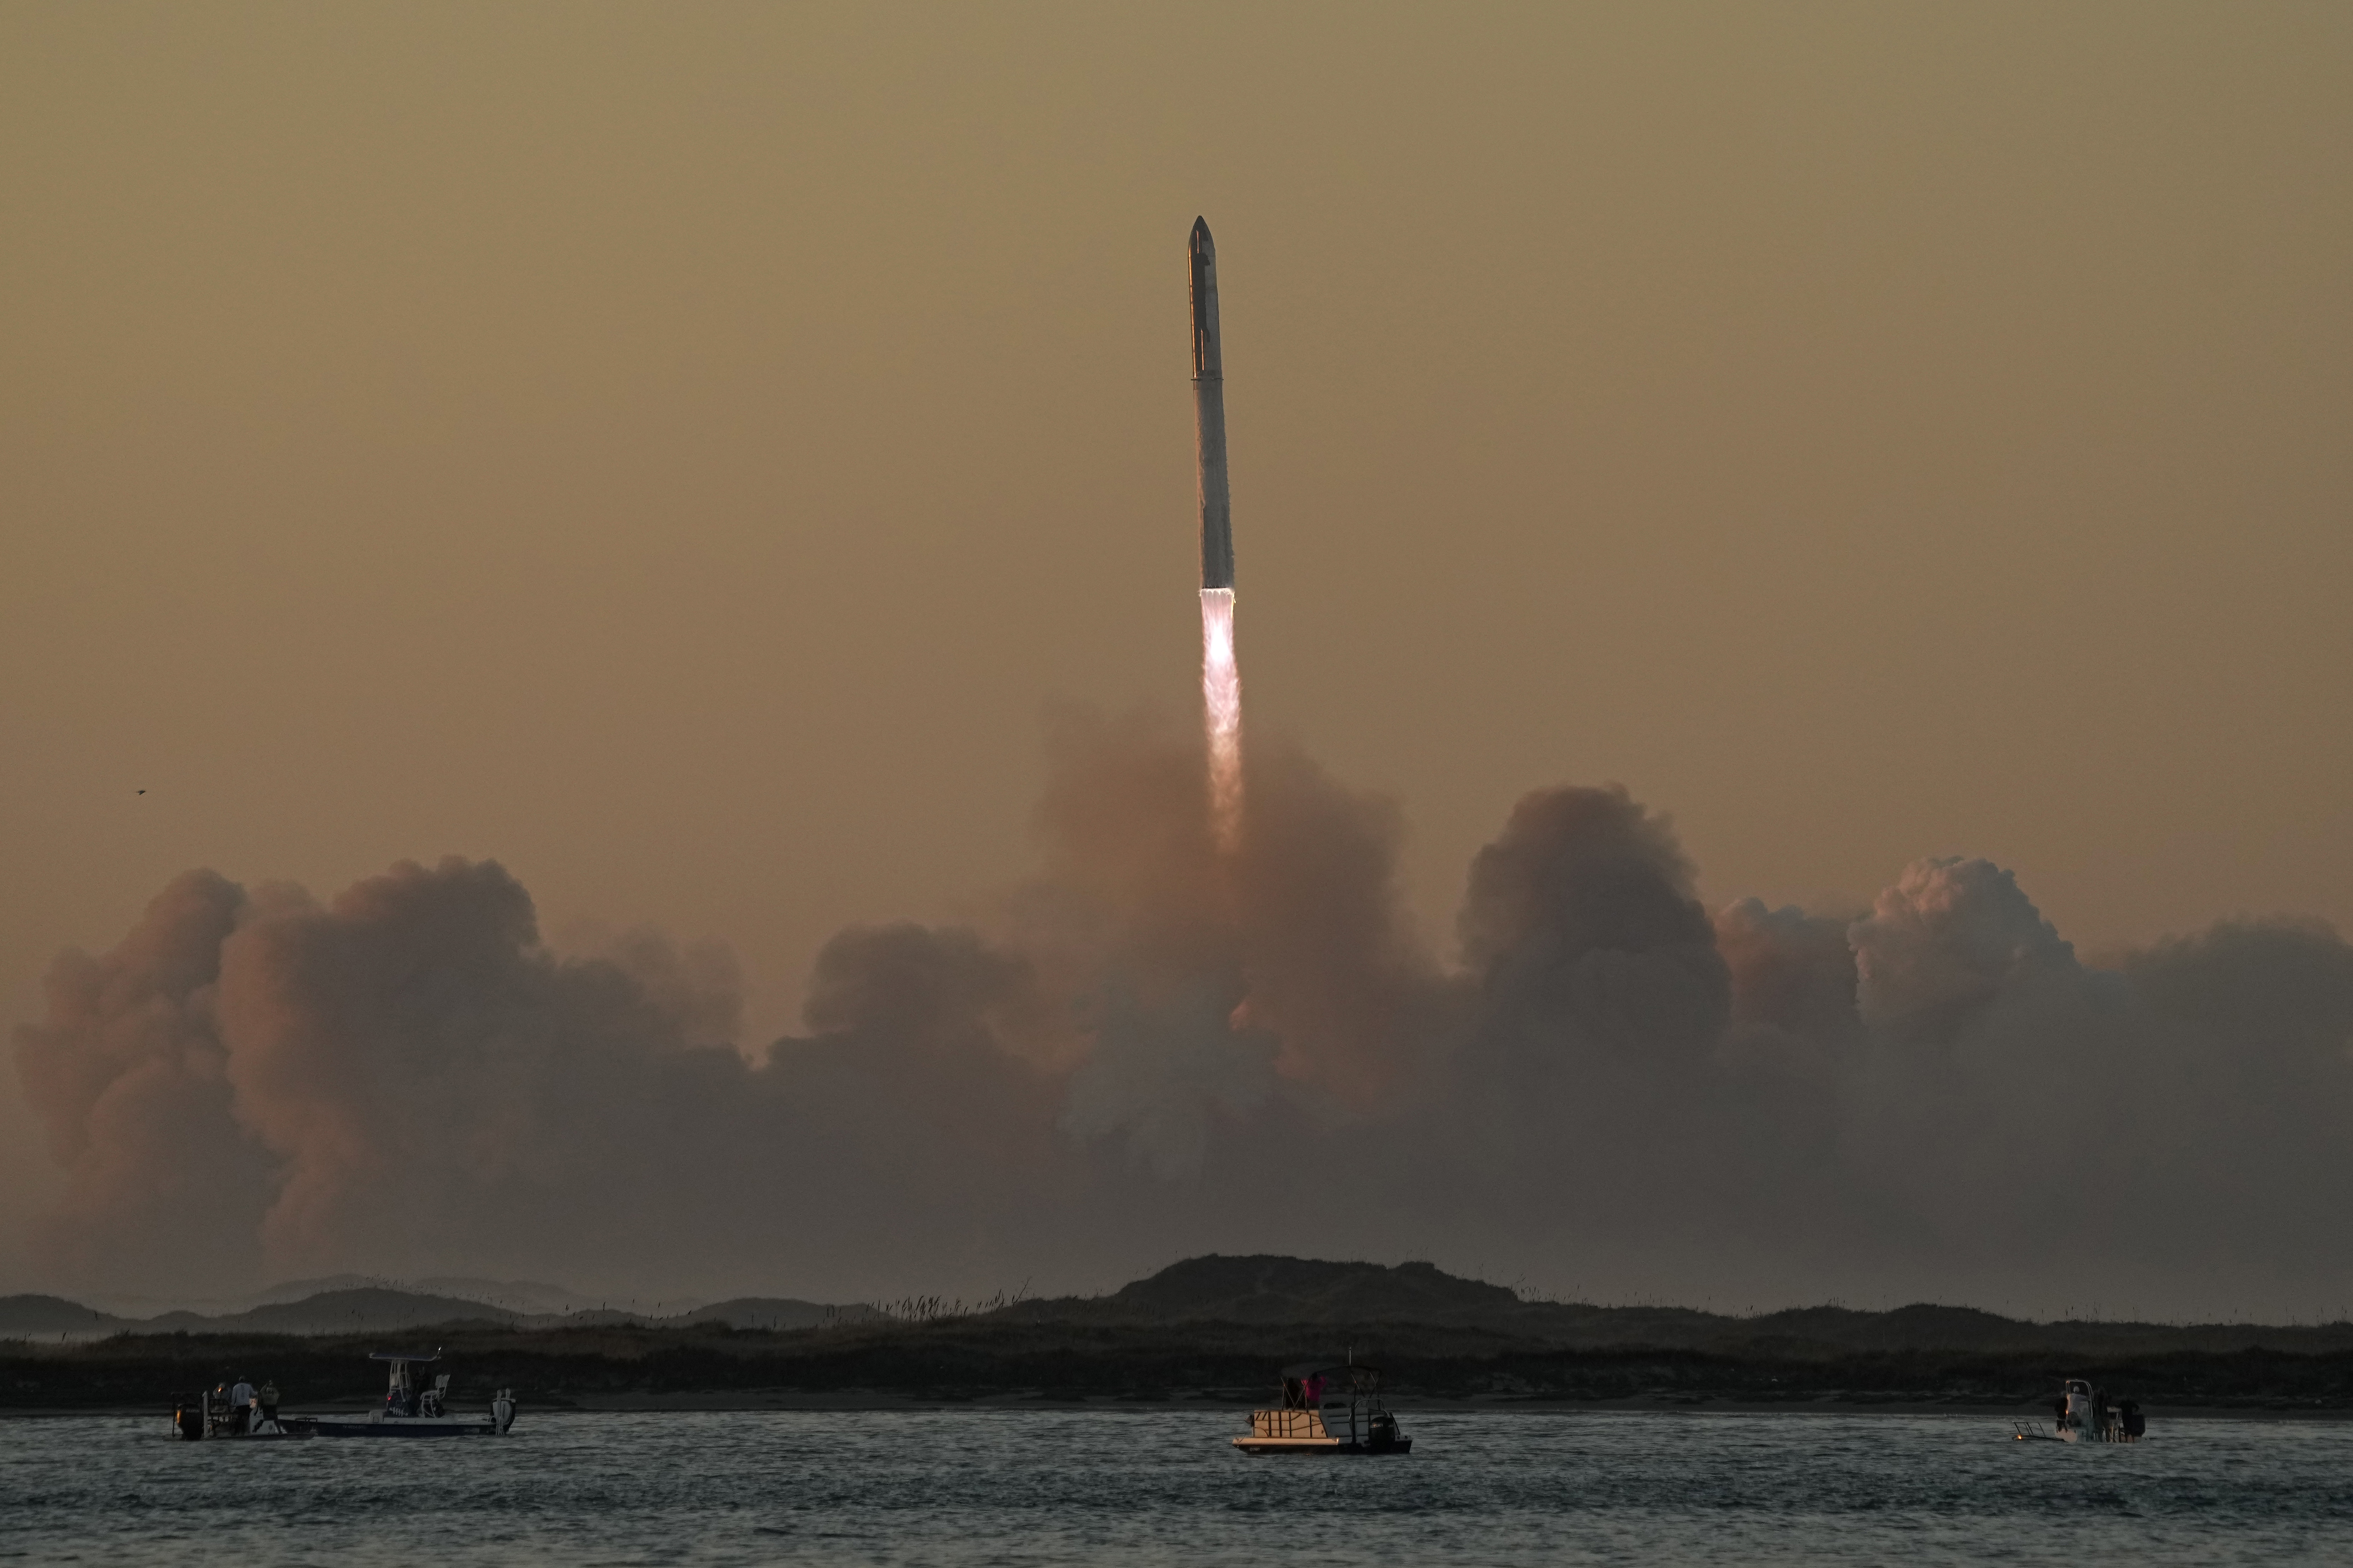 SpaceX's Starship will launch for a test flight from Starbase in Boca Chica, Texas, on Saturday, November 18th.